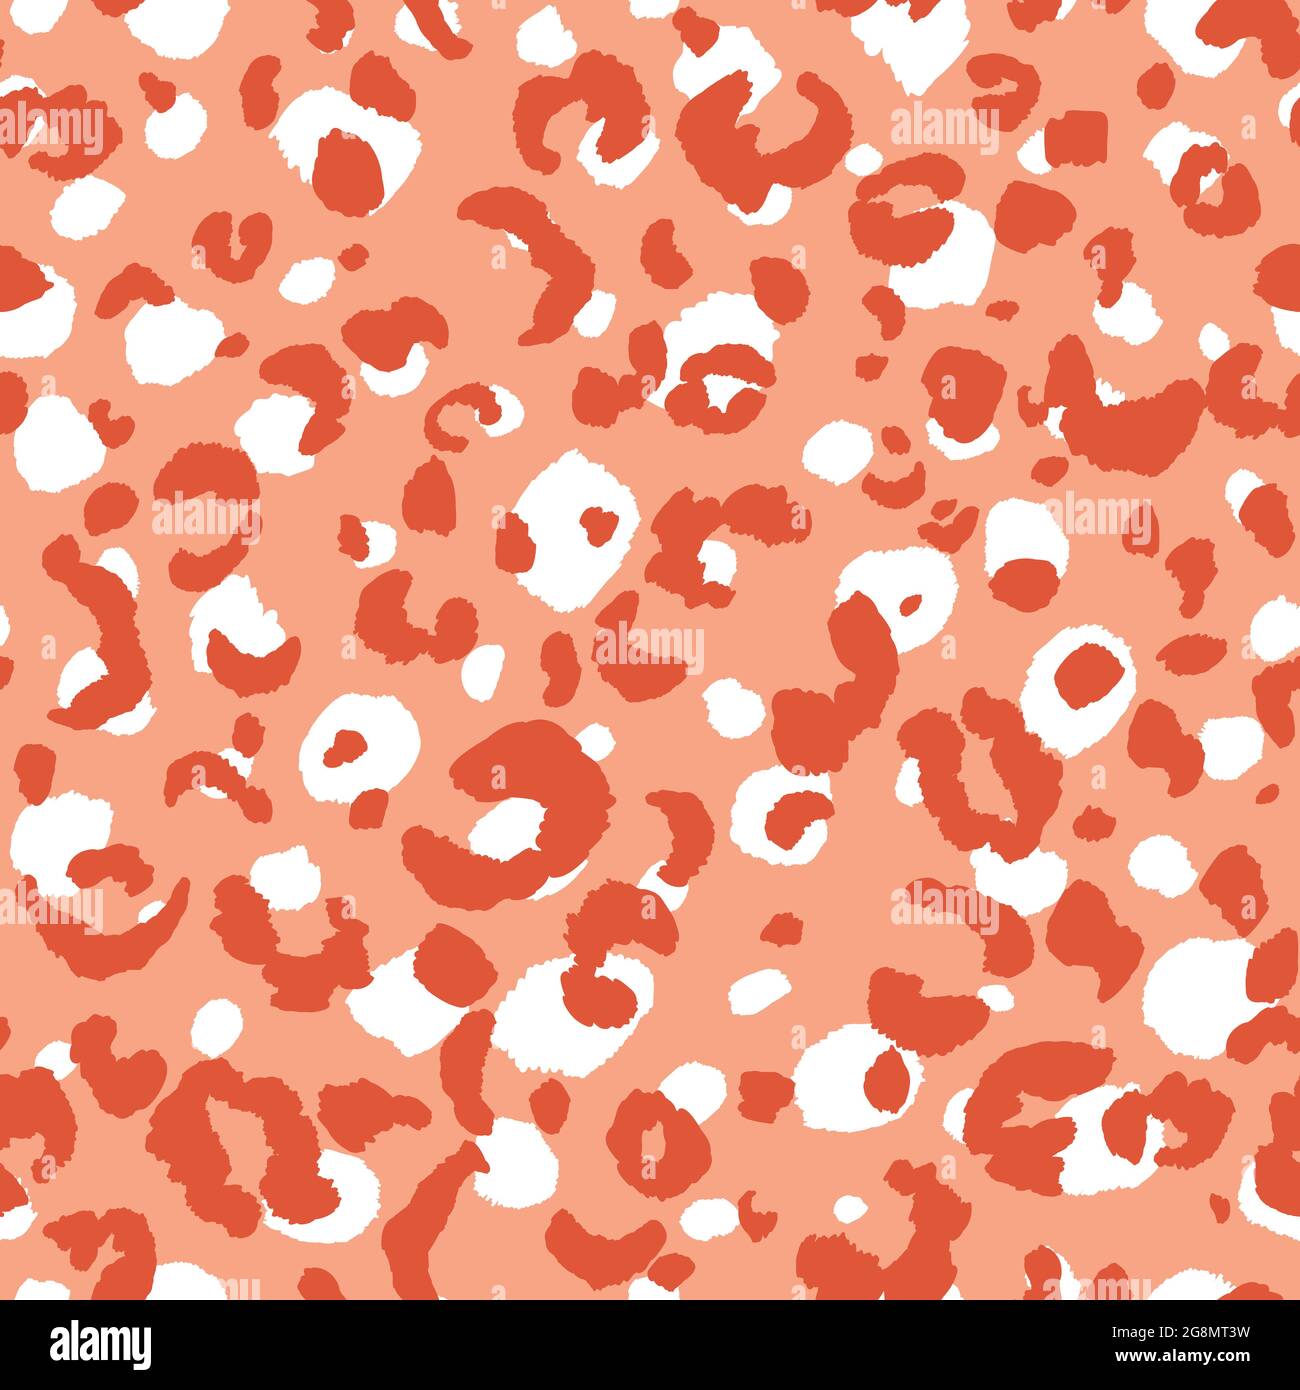 Abstract modern leopard seamless pattern. Animals trendy background ...